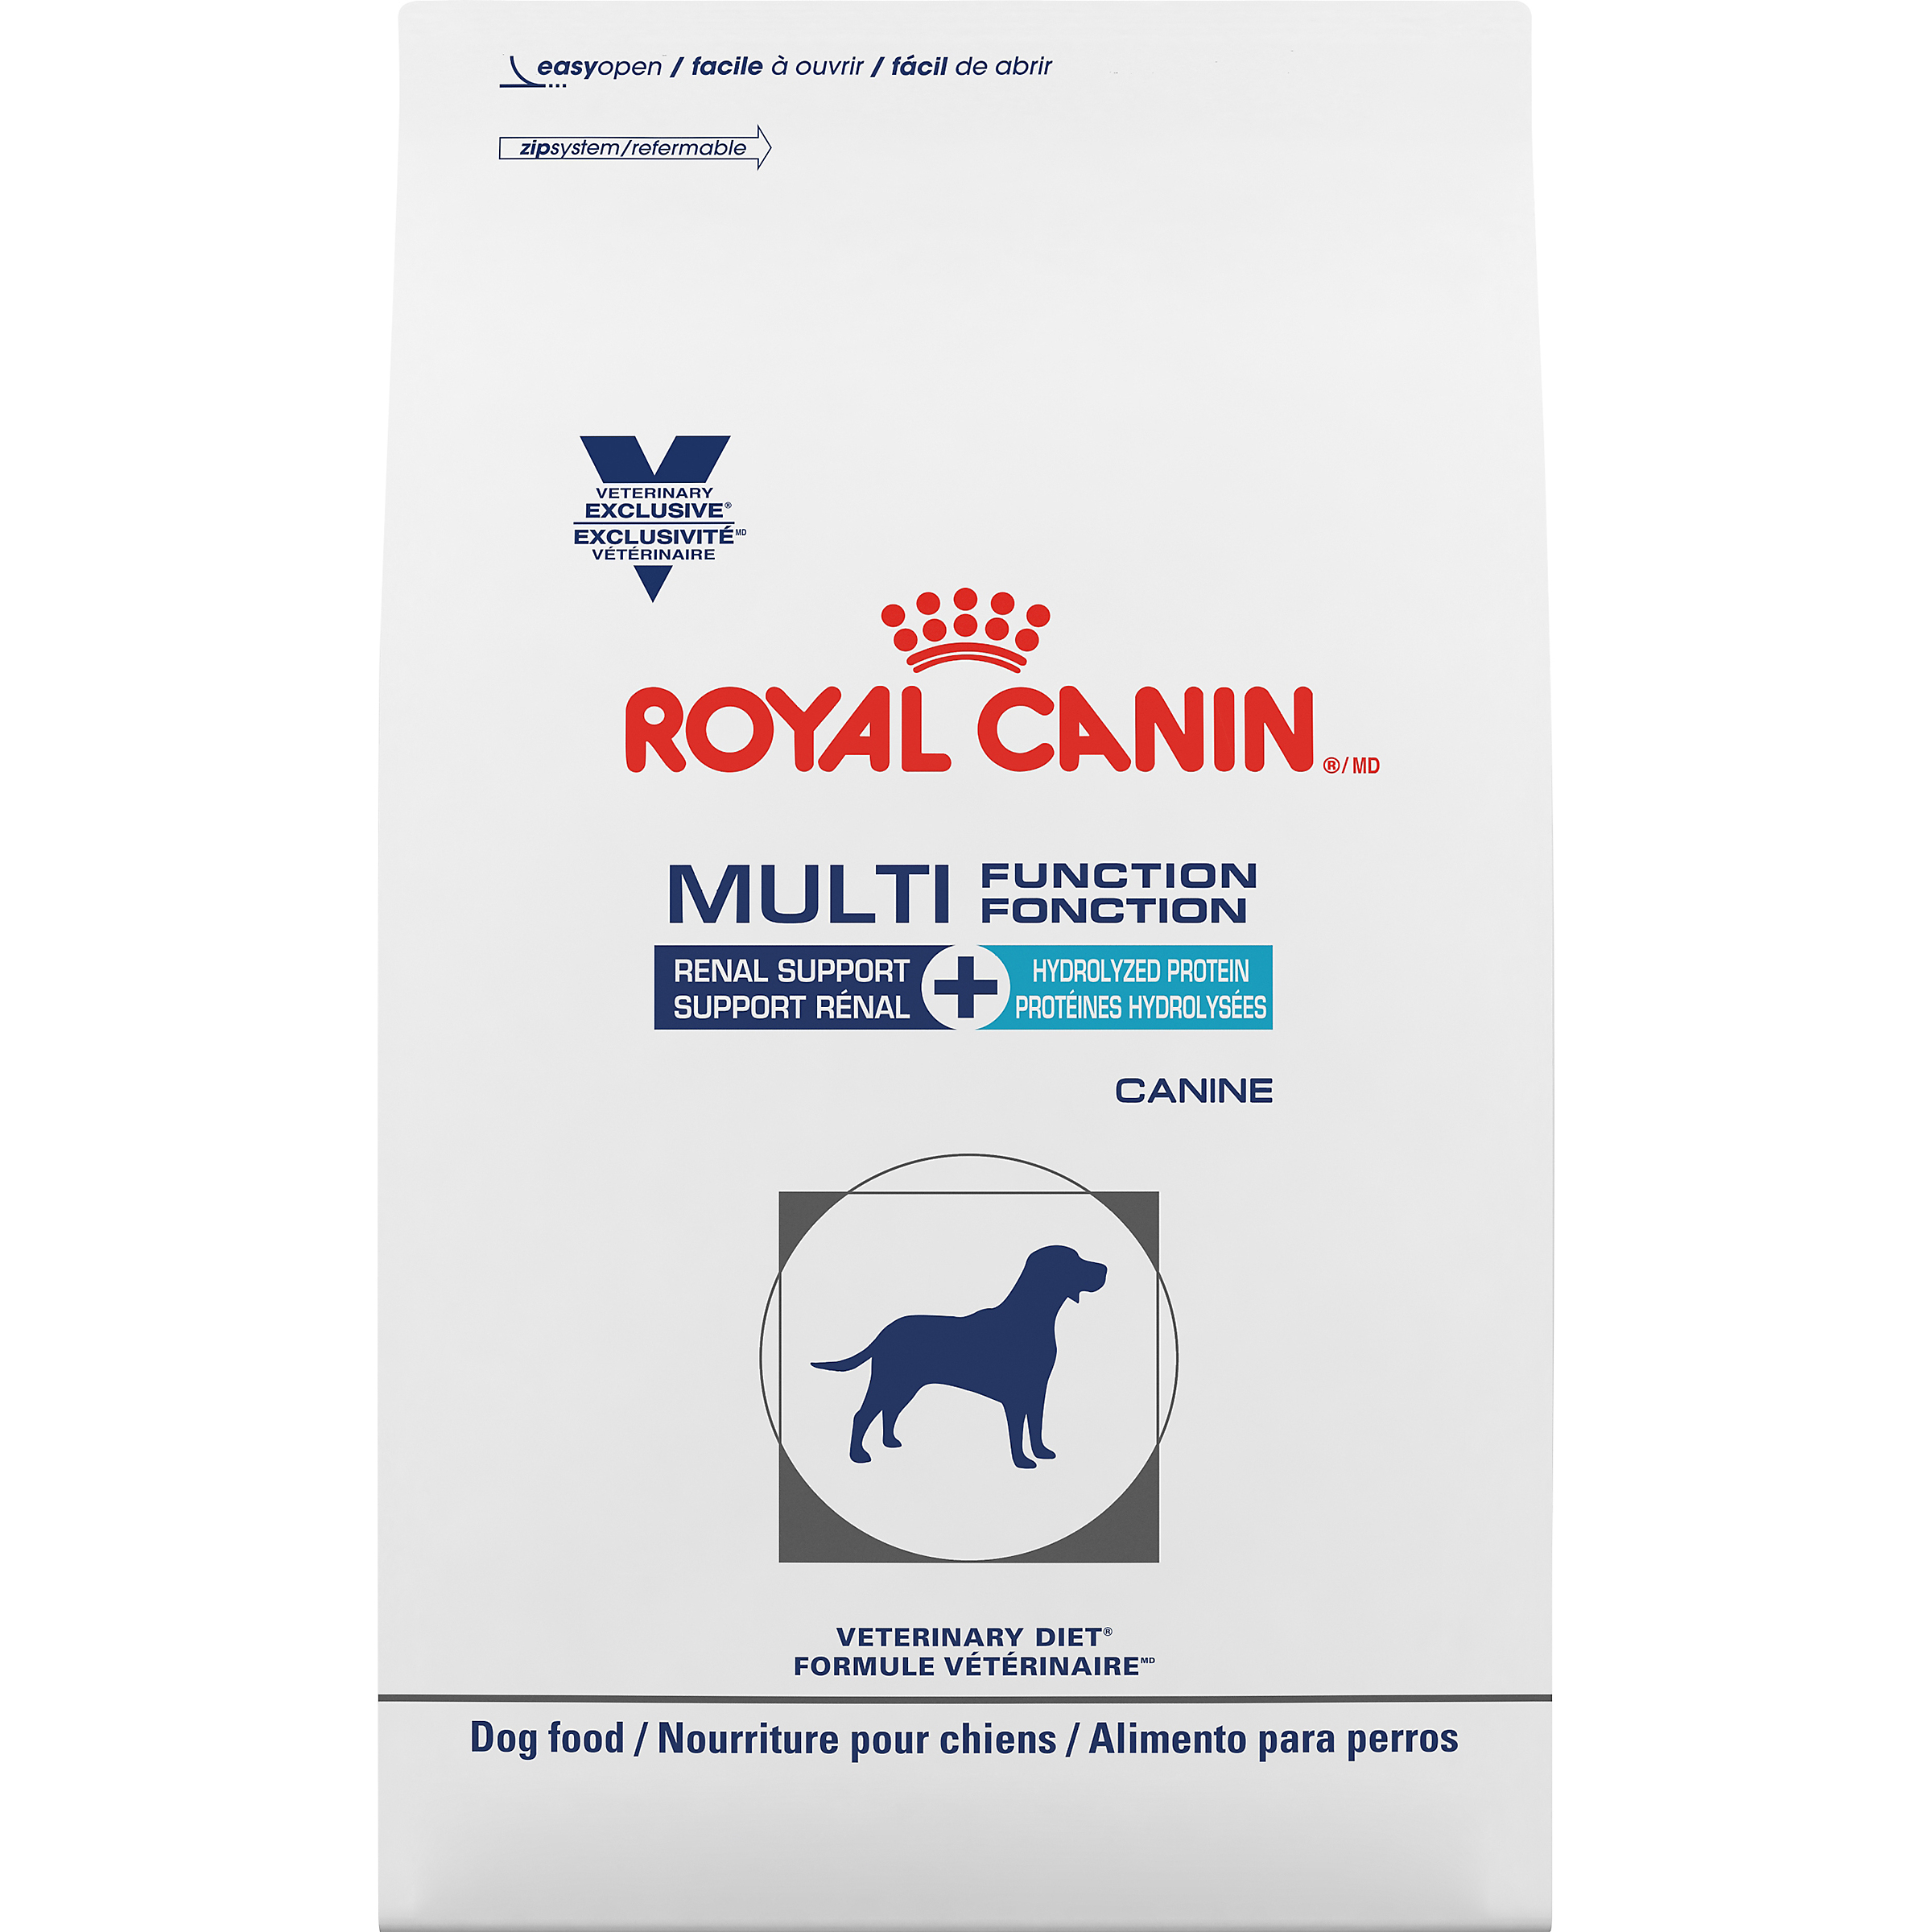 Canine Multifunction Renal Support + Hydrolyzed Protein